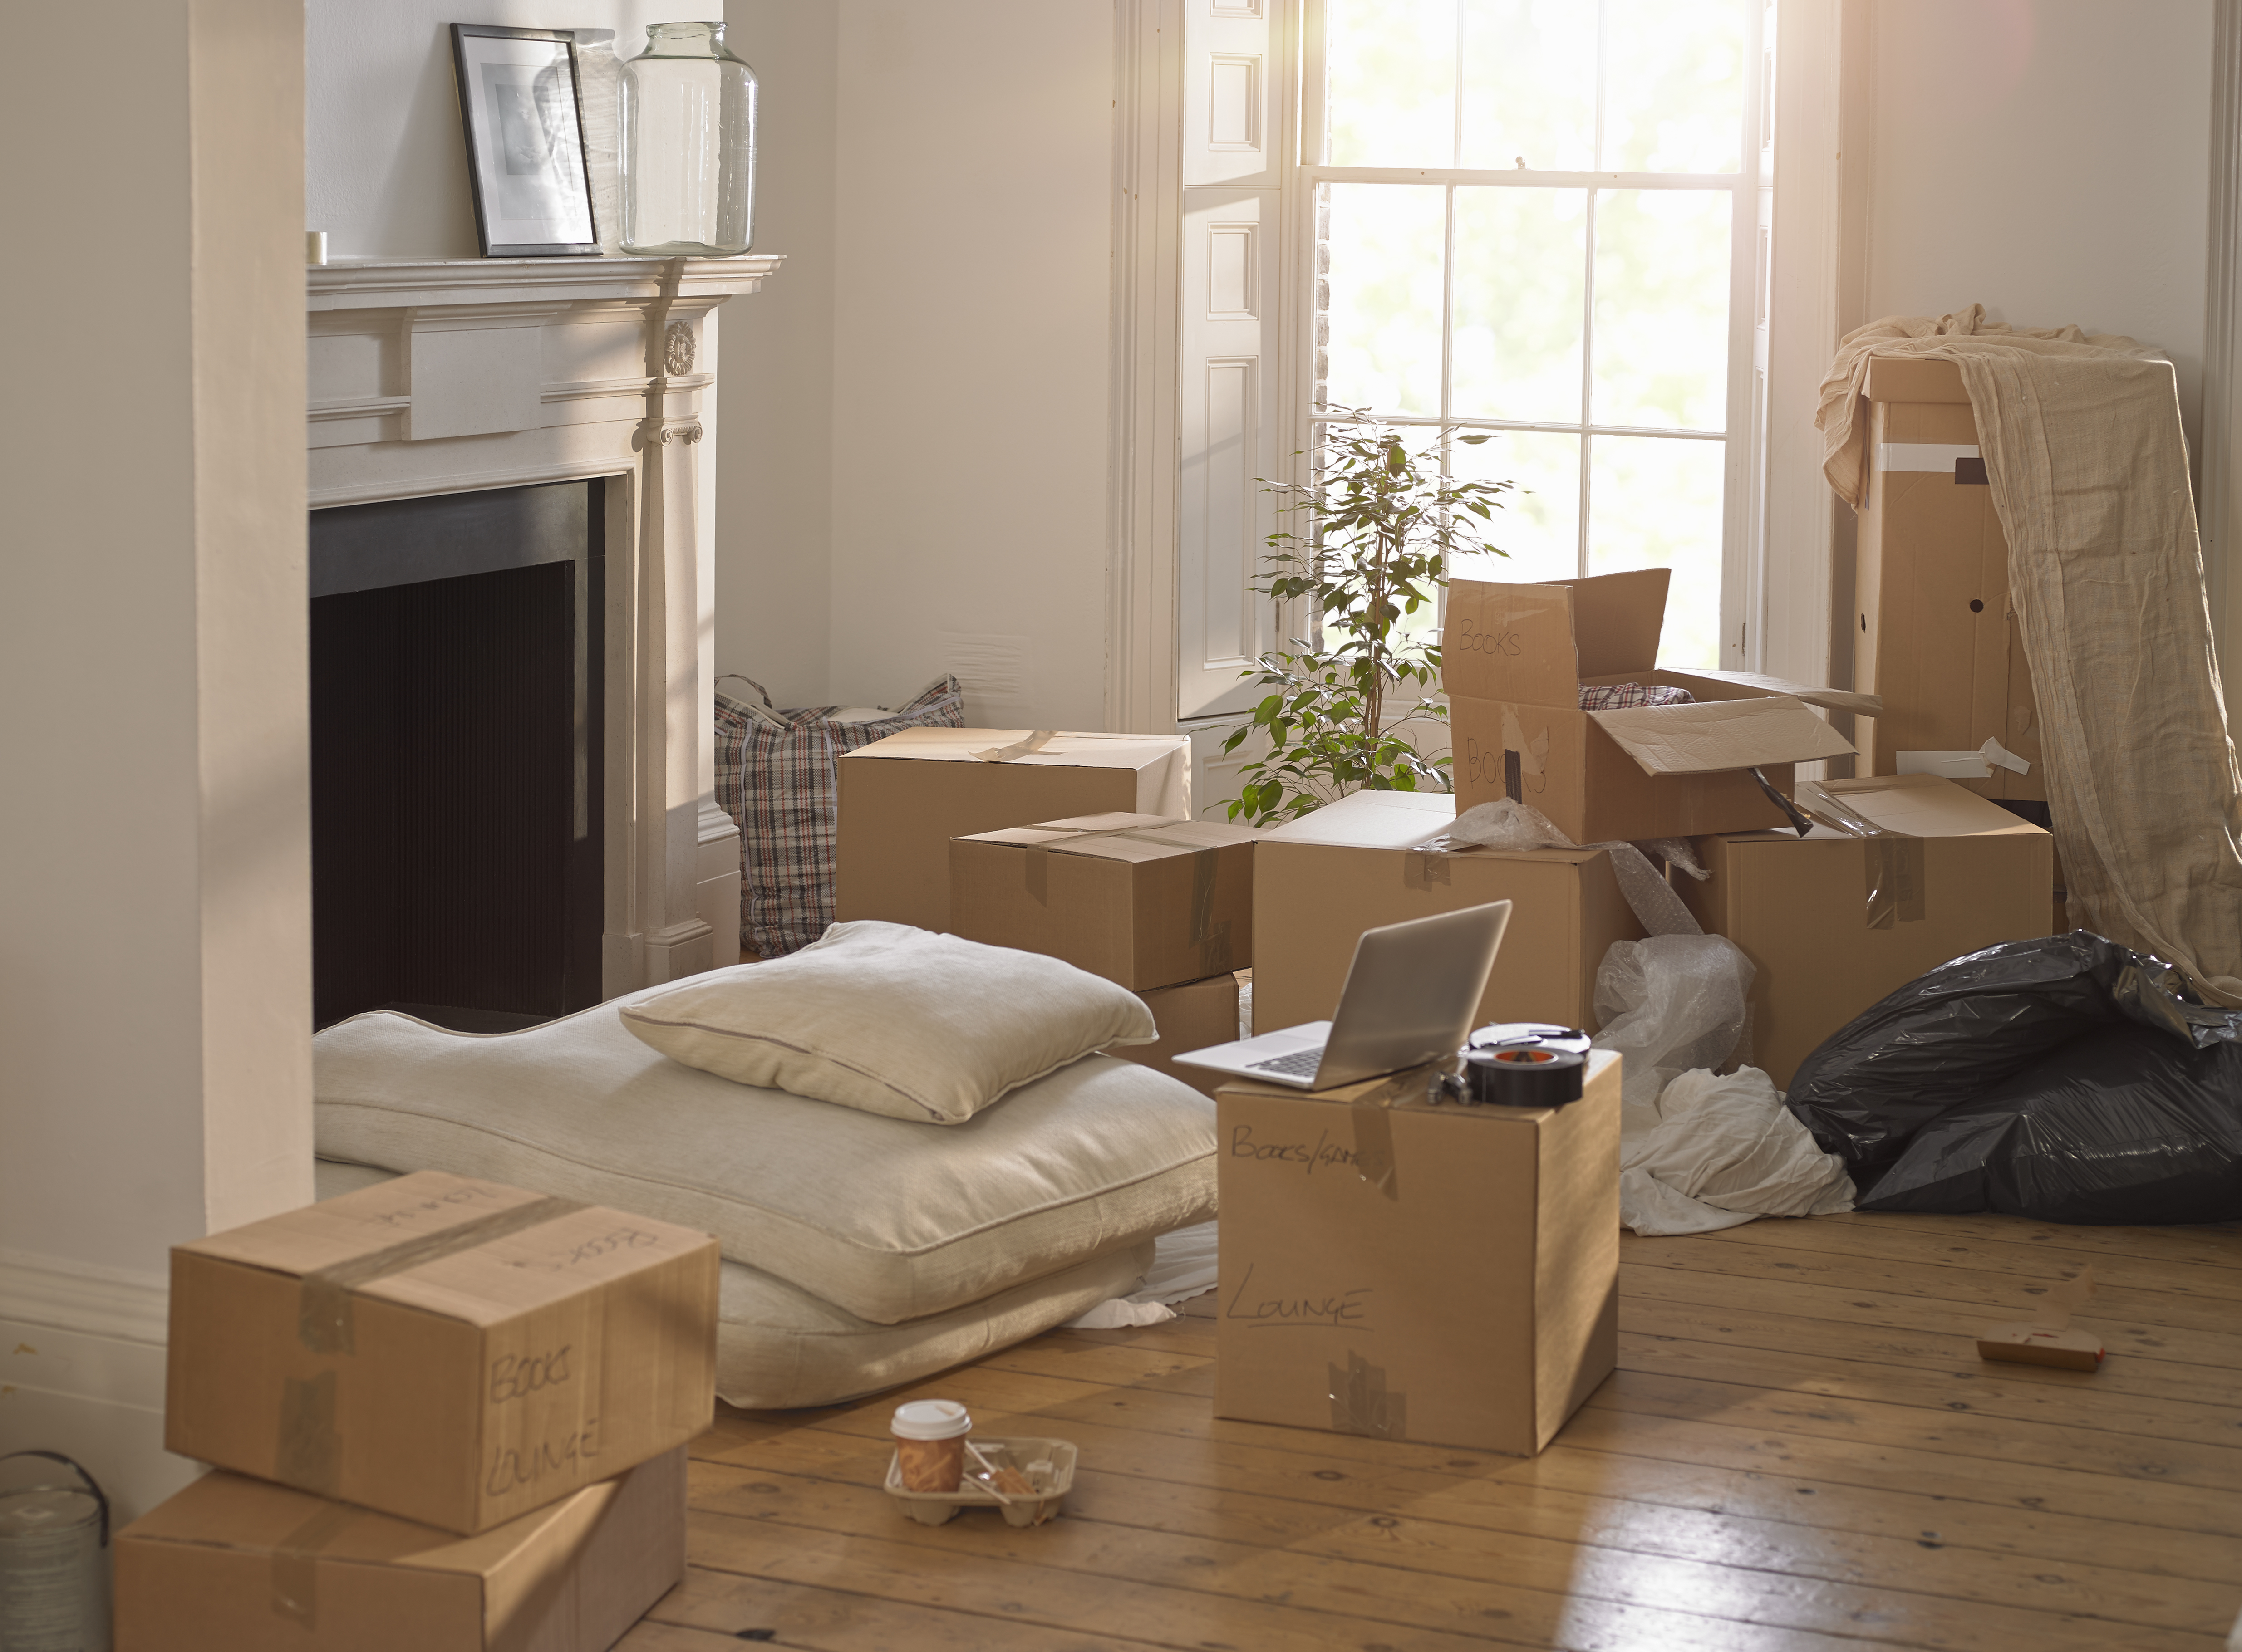 Home decor being moved | Source: Getty Images